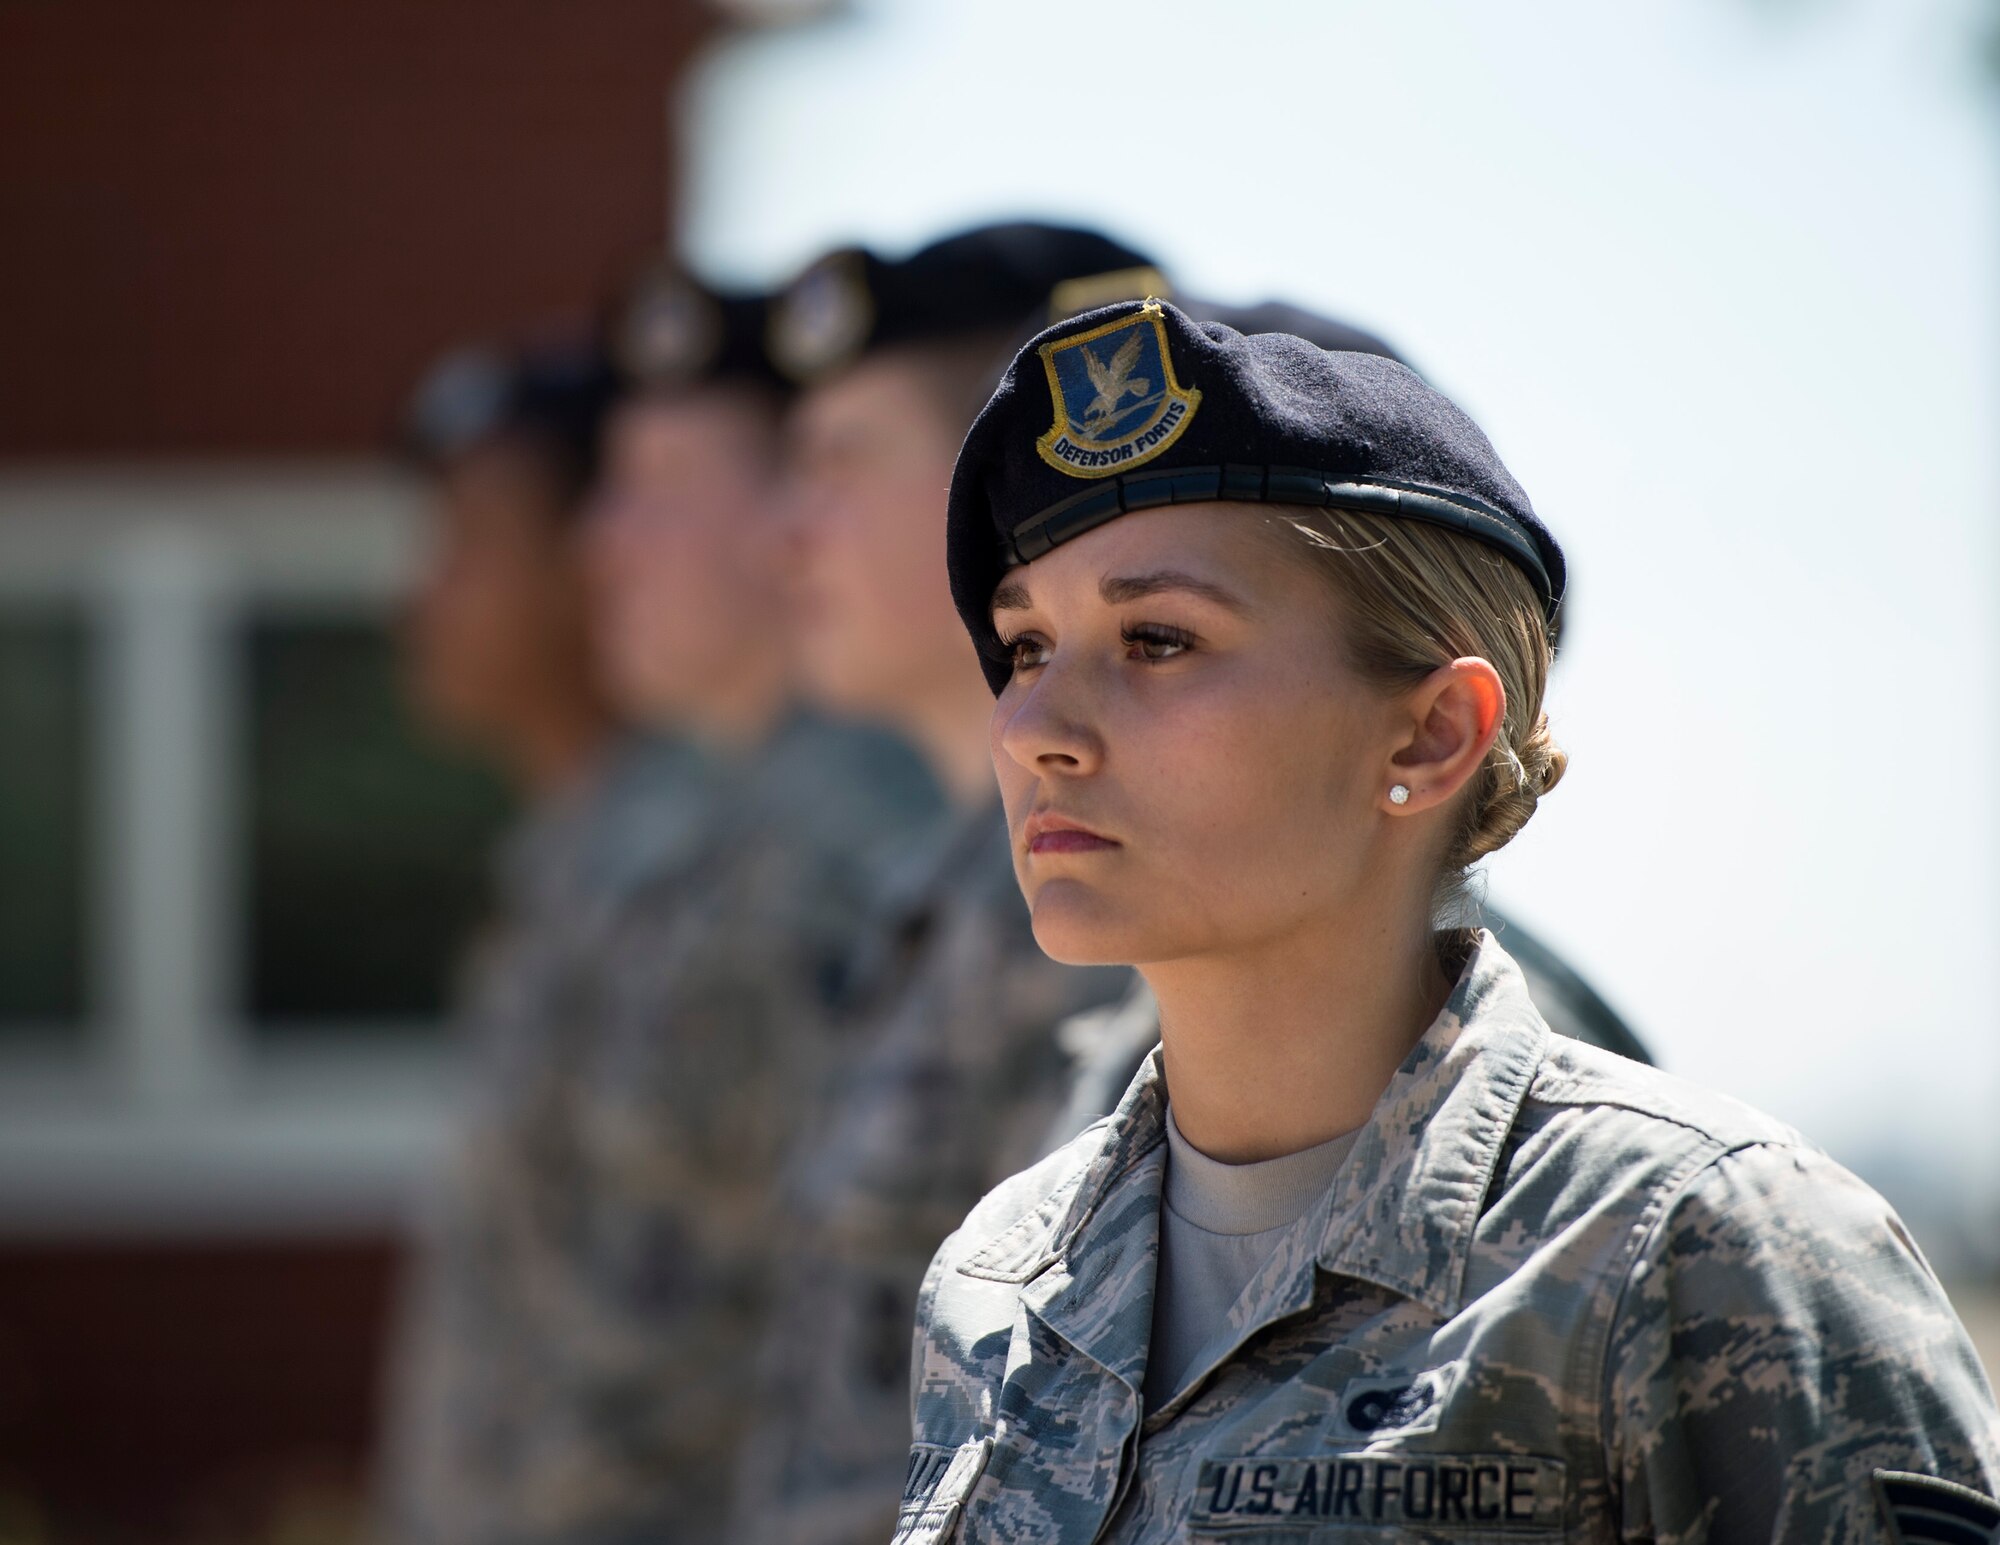 Defenders from the 133rd and 934th Security Forces Squadrons patriciate in the second annual Police Week Ceremony in Minneapolis, Minn., May 15, 2019.